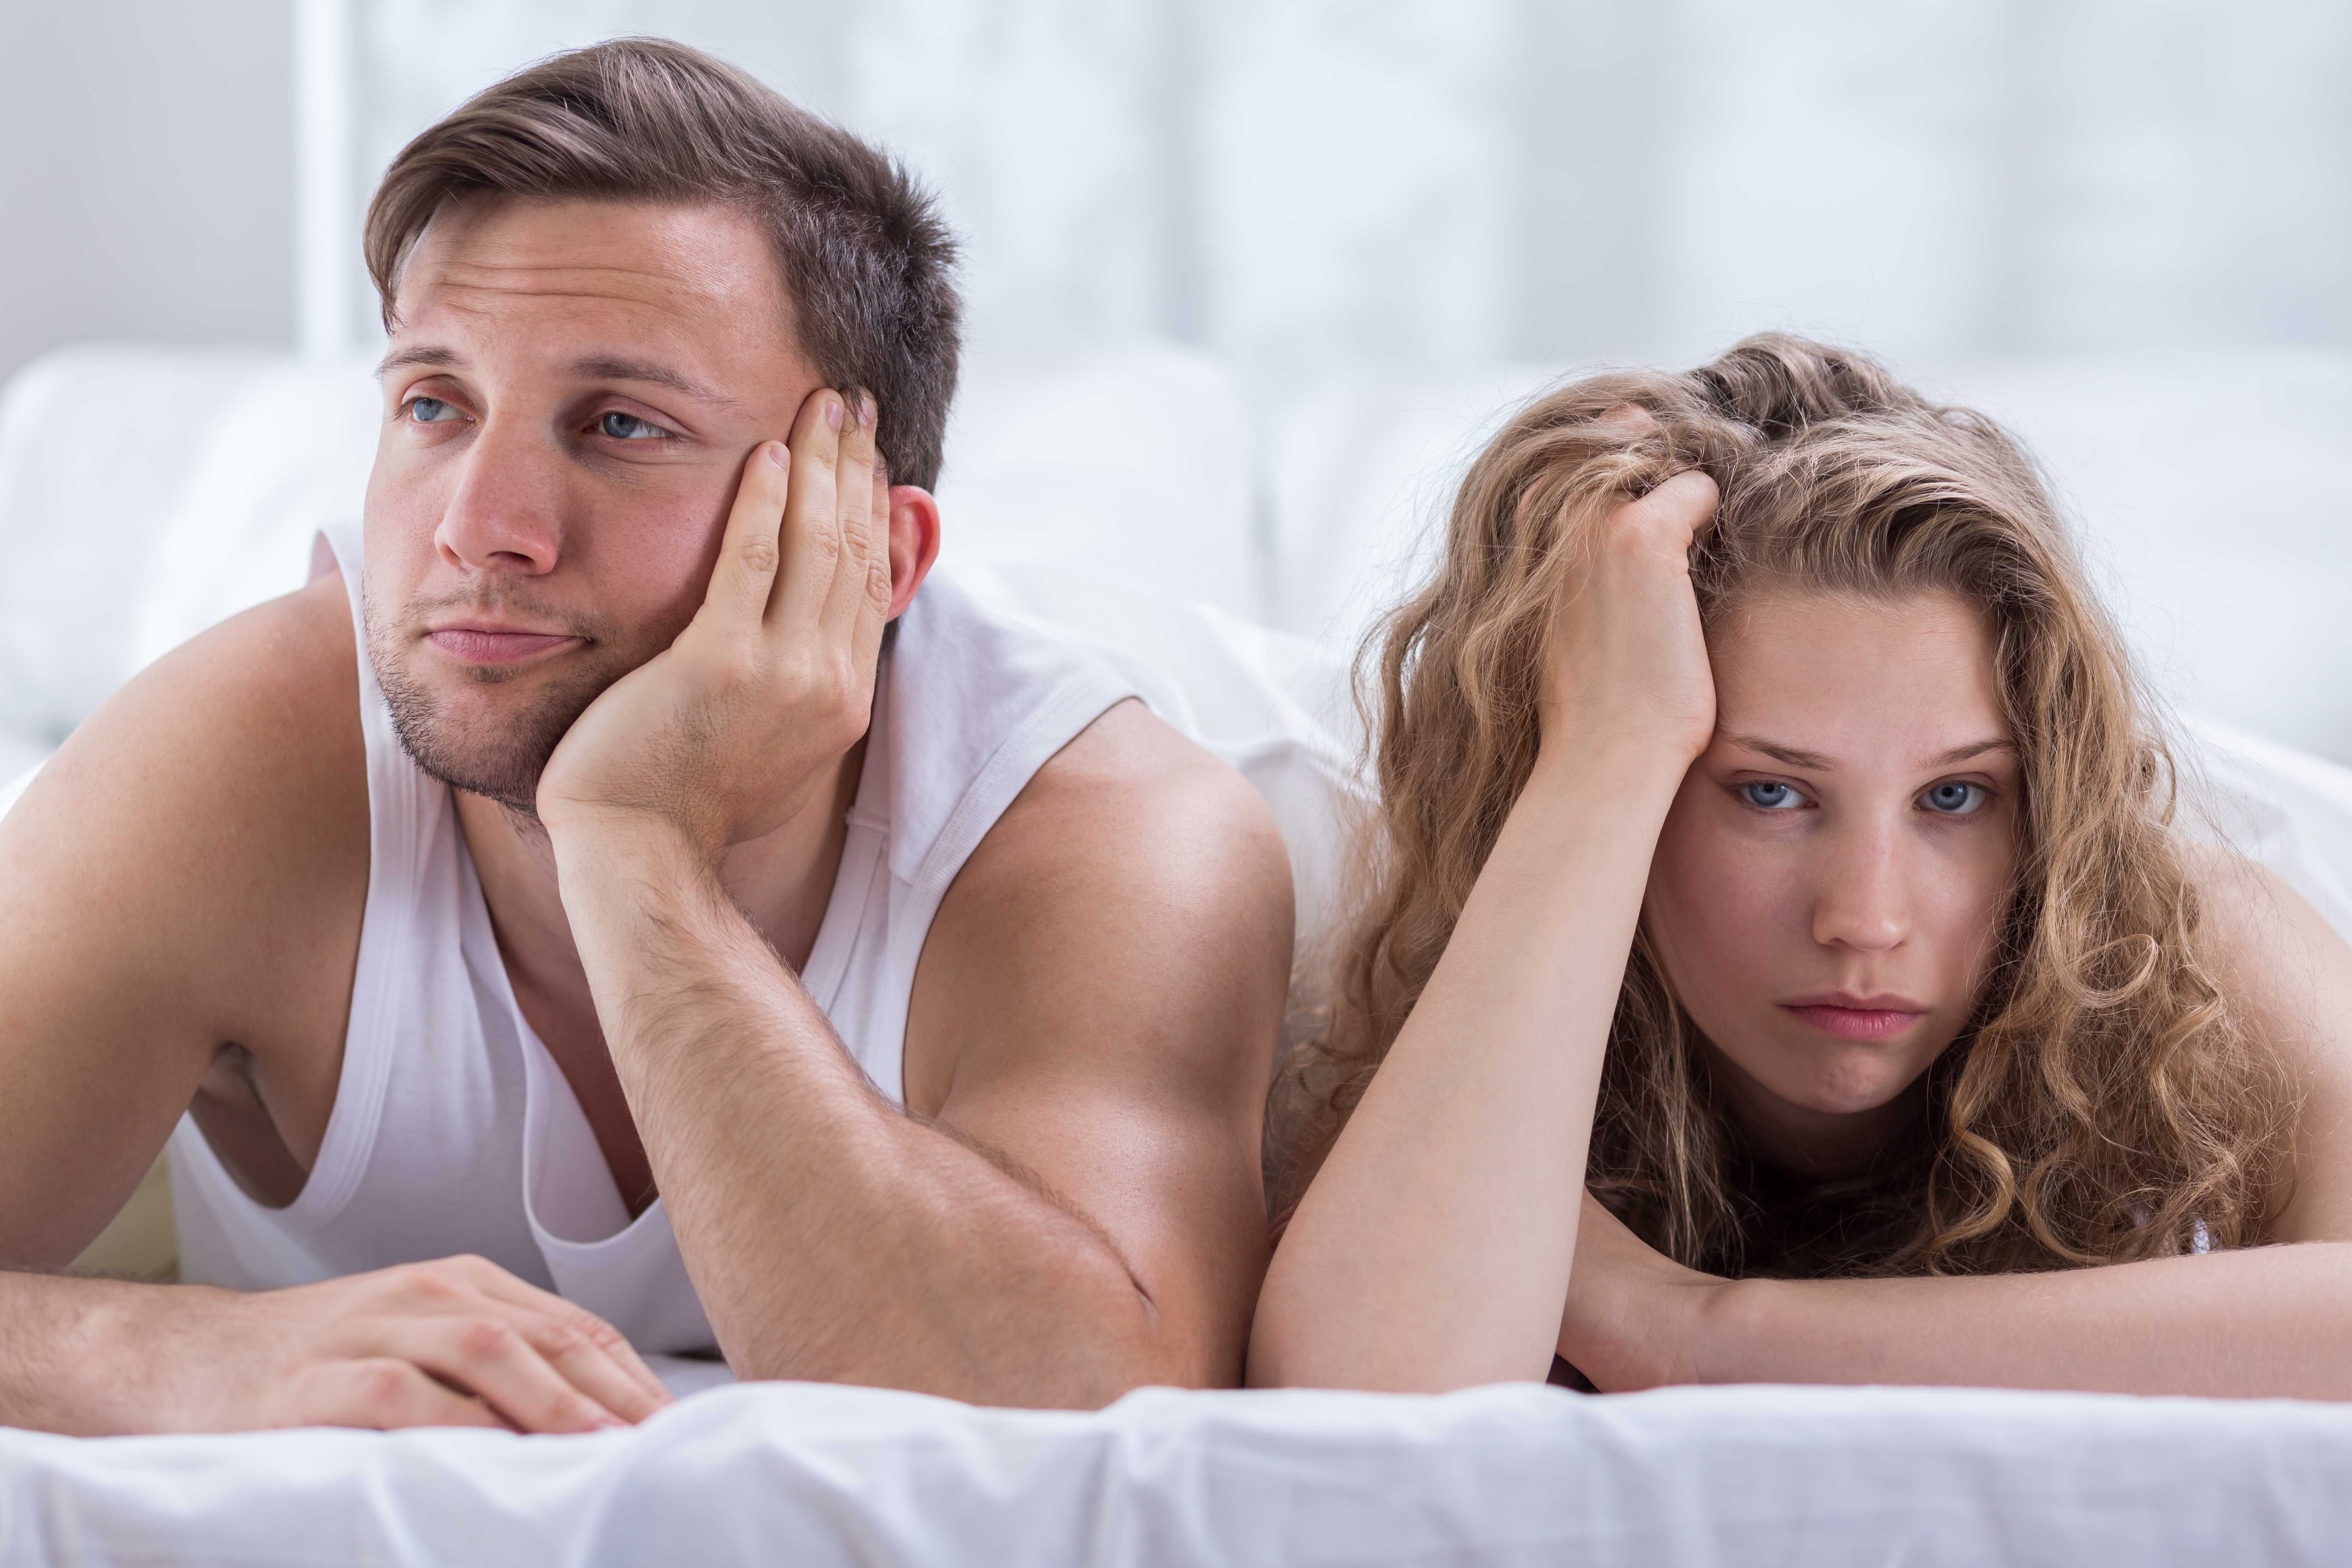 A couple looking bored | Source: Shutterstock